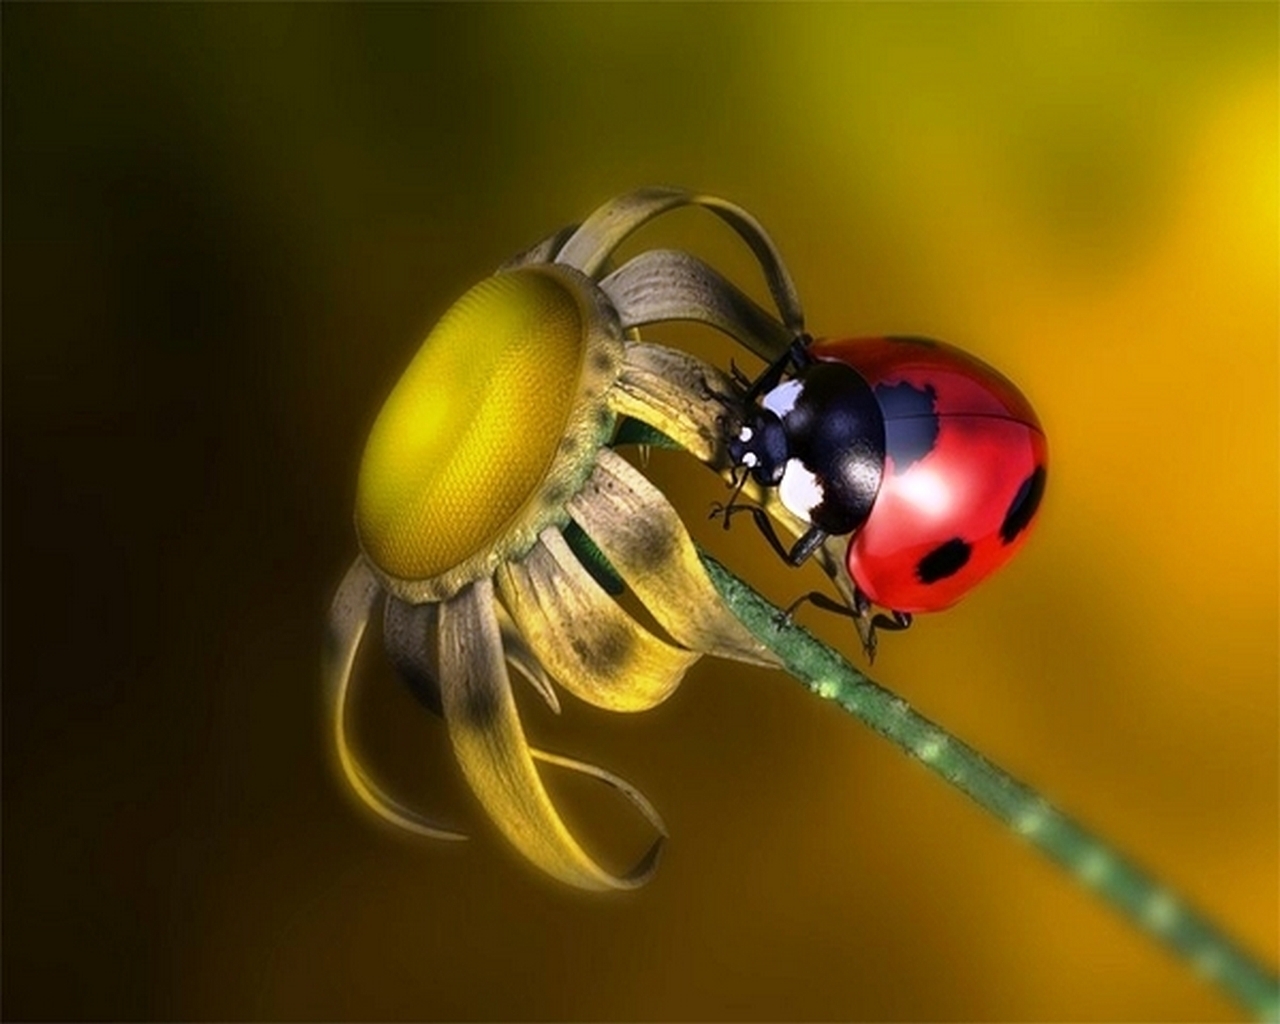 flowers, insects, camomile, ladybugs, yellow iphone wallpaper